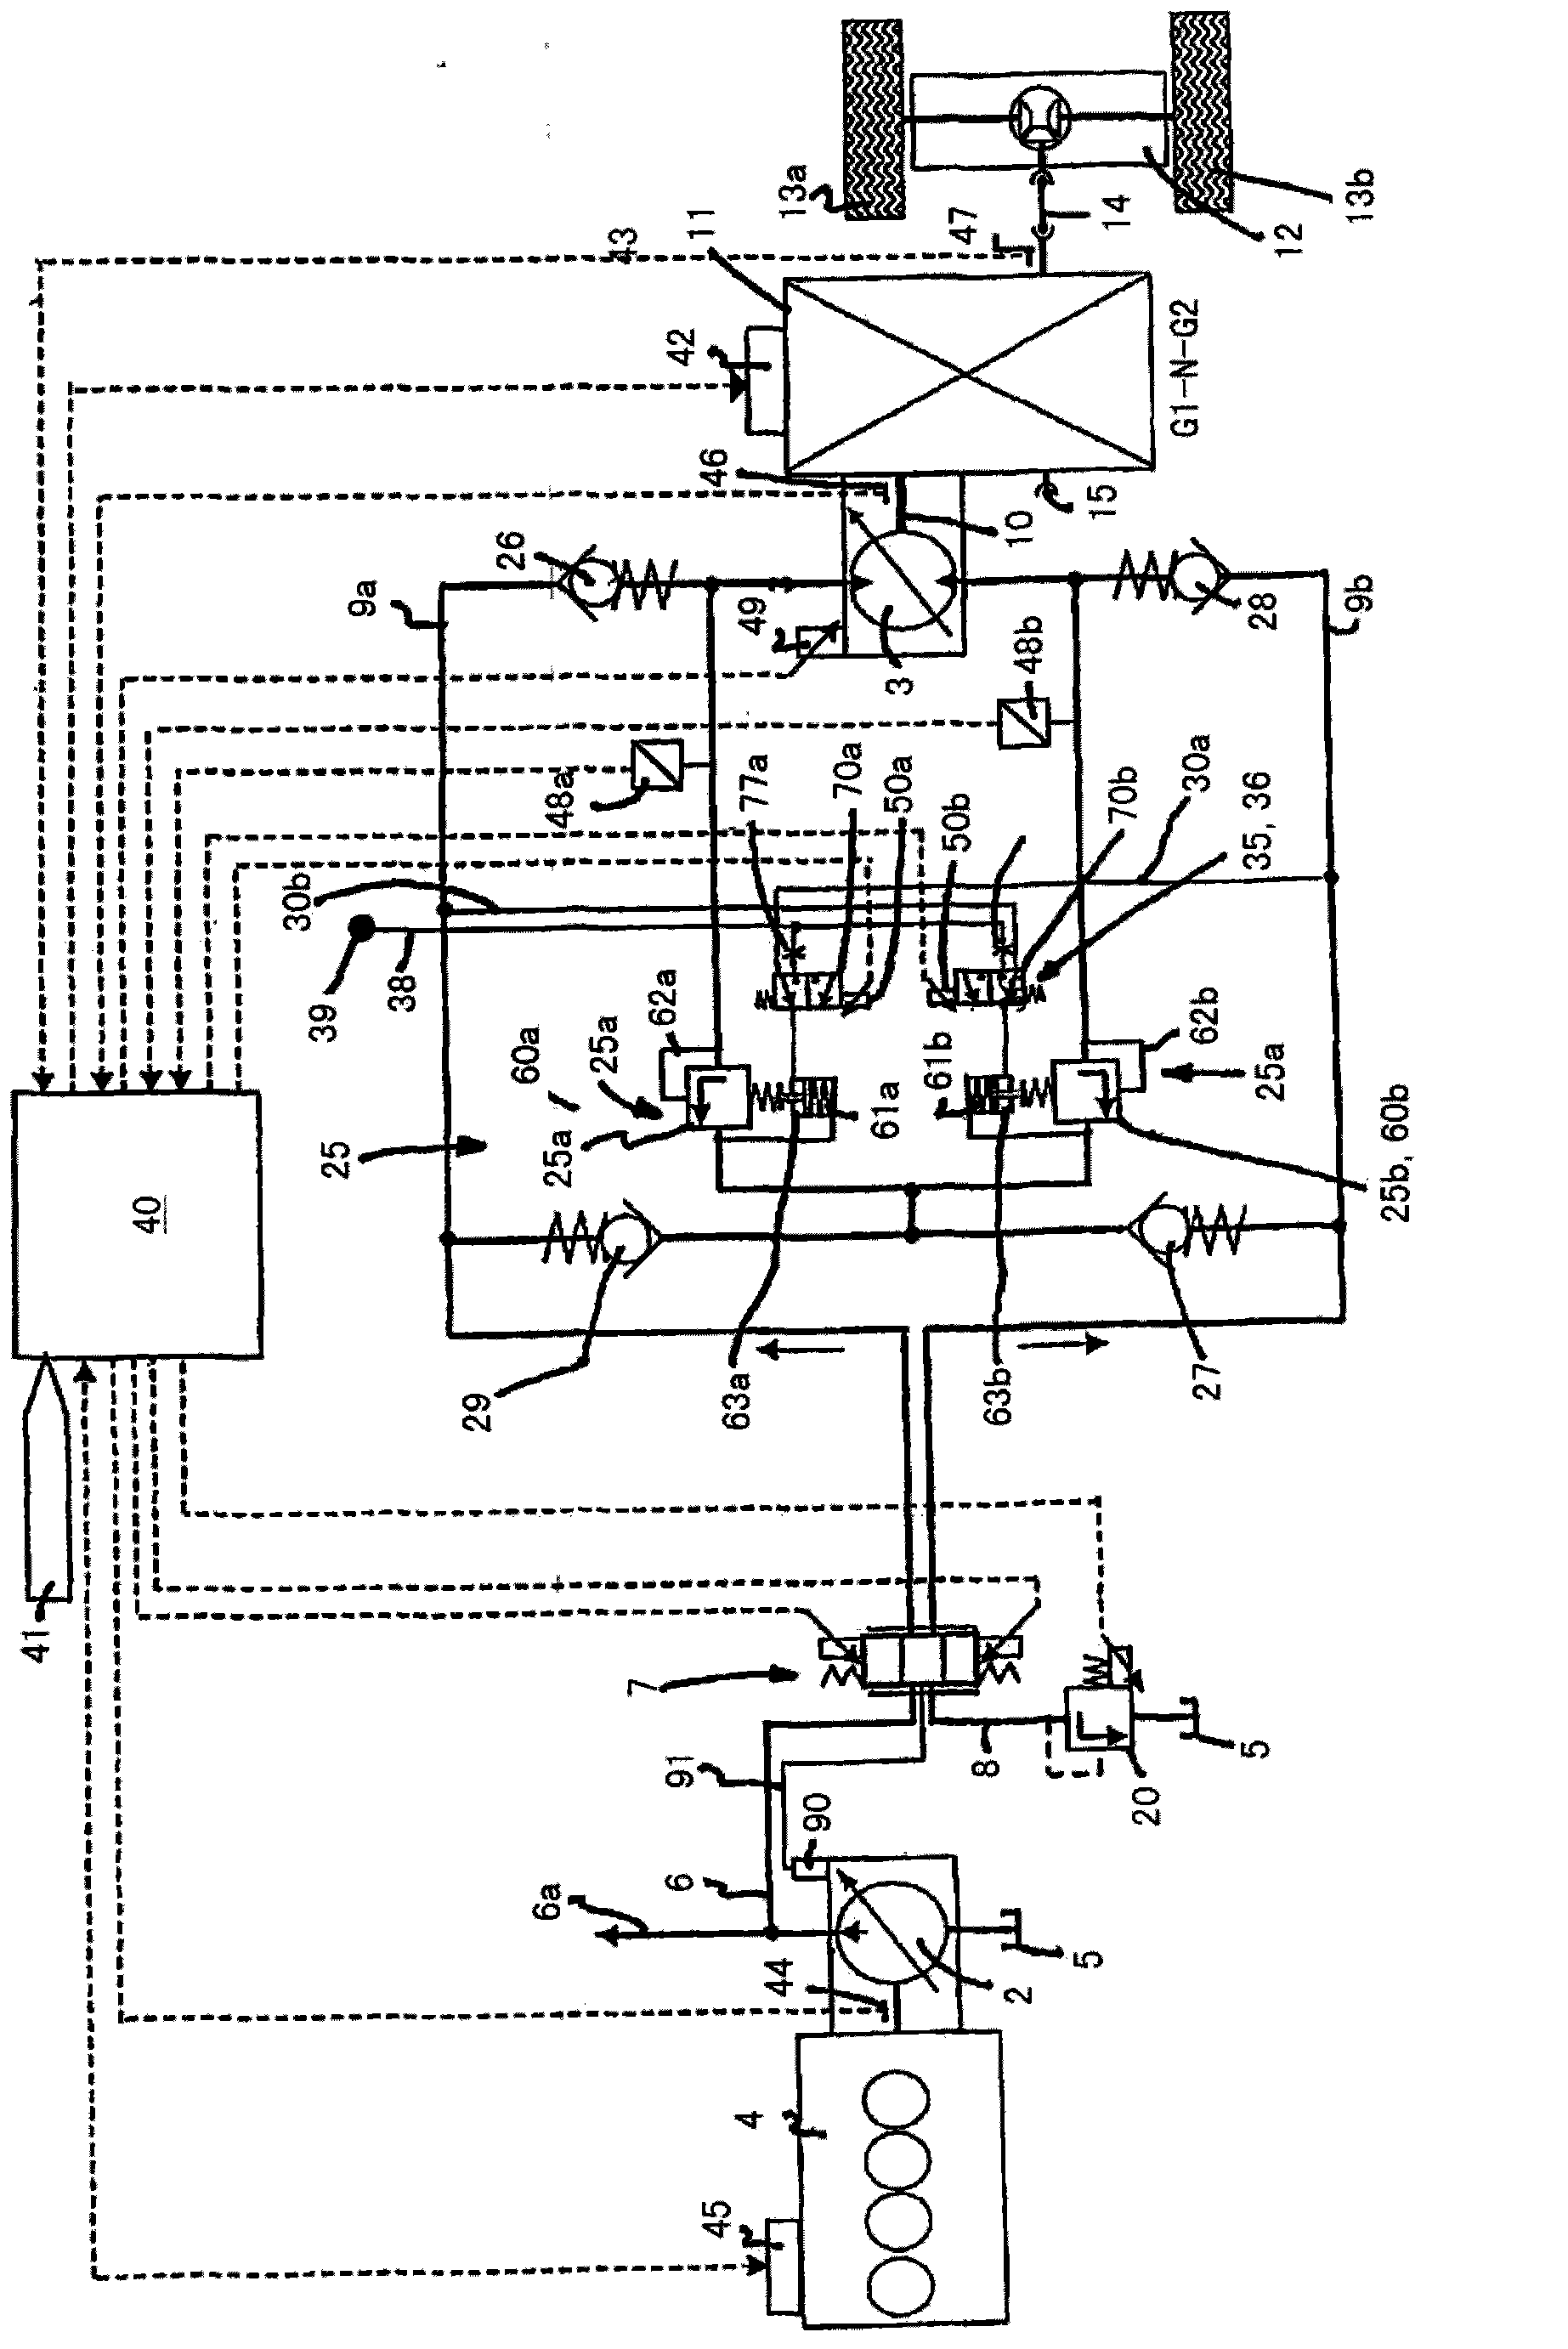 Method for shifting gears of transmission device gear-shifting transmission capable of being switched between at least two transmission levels